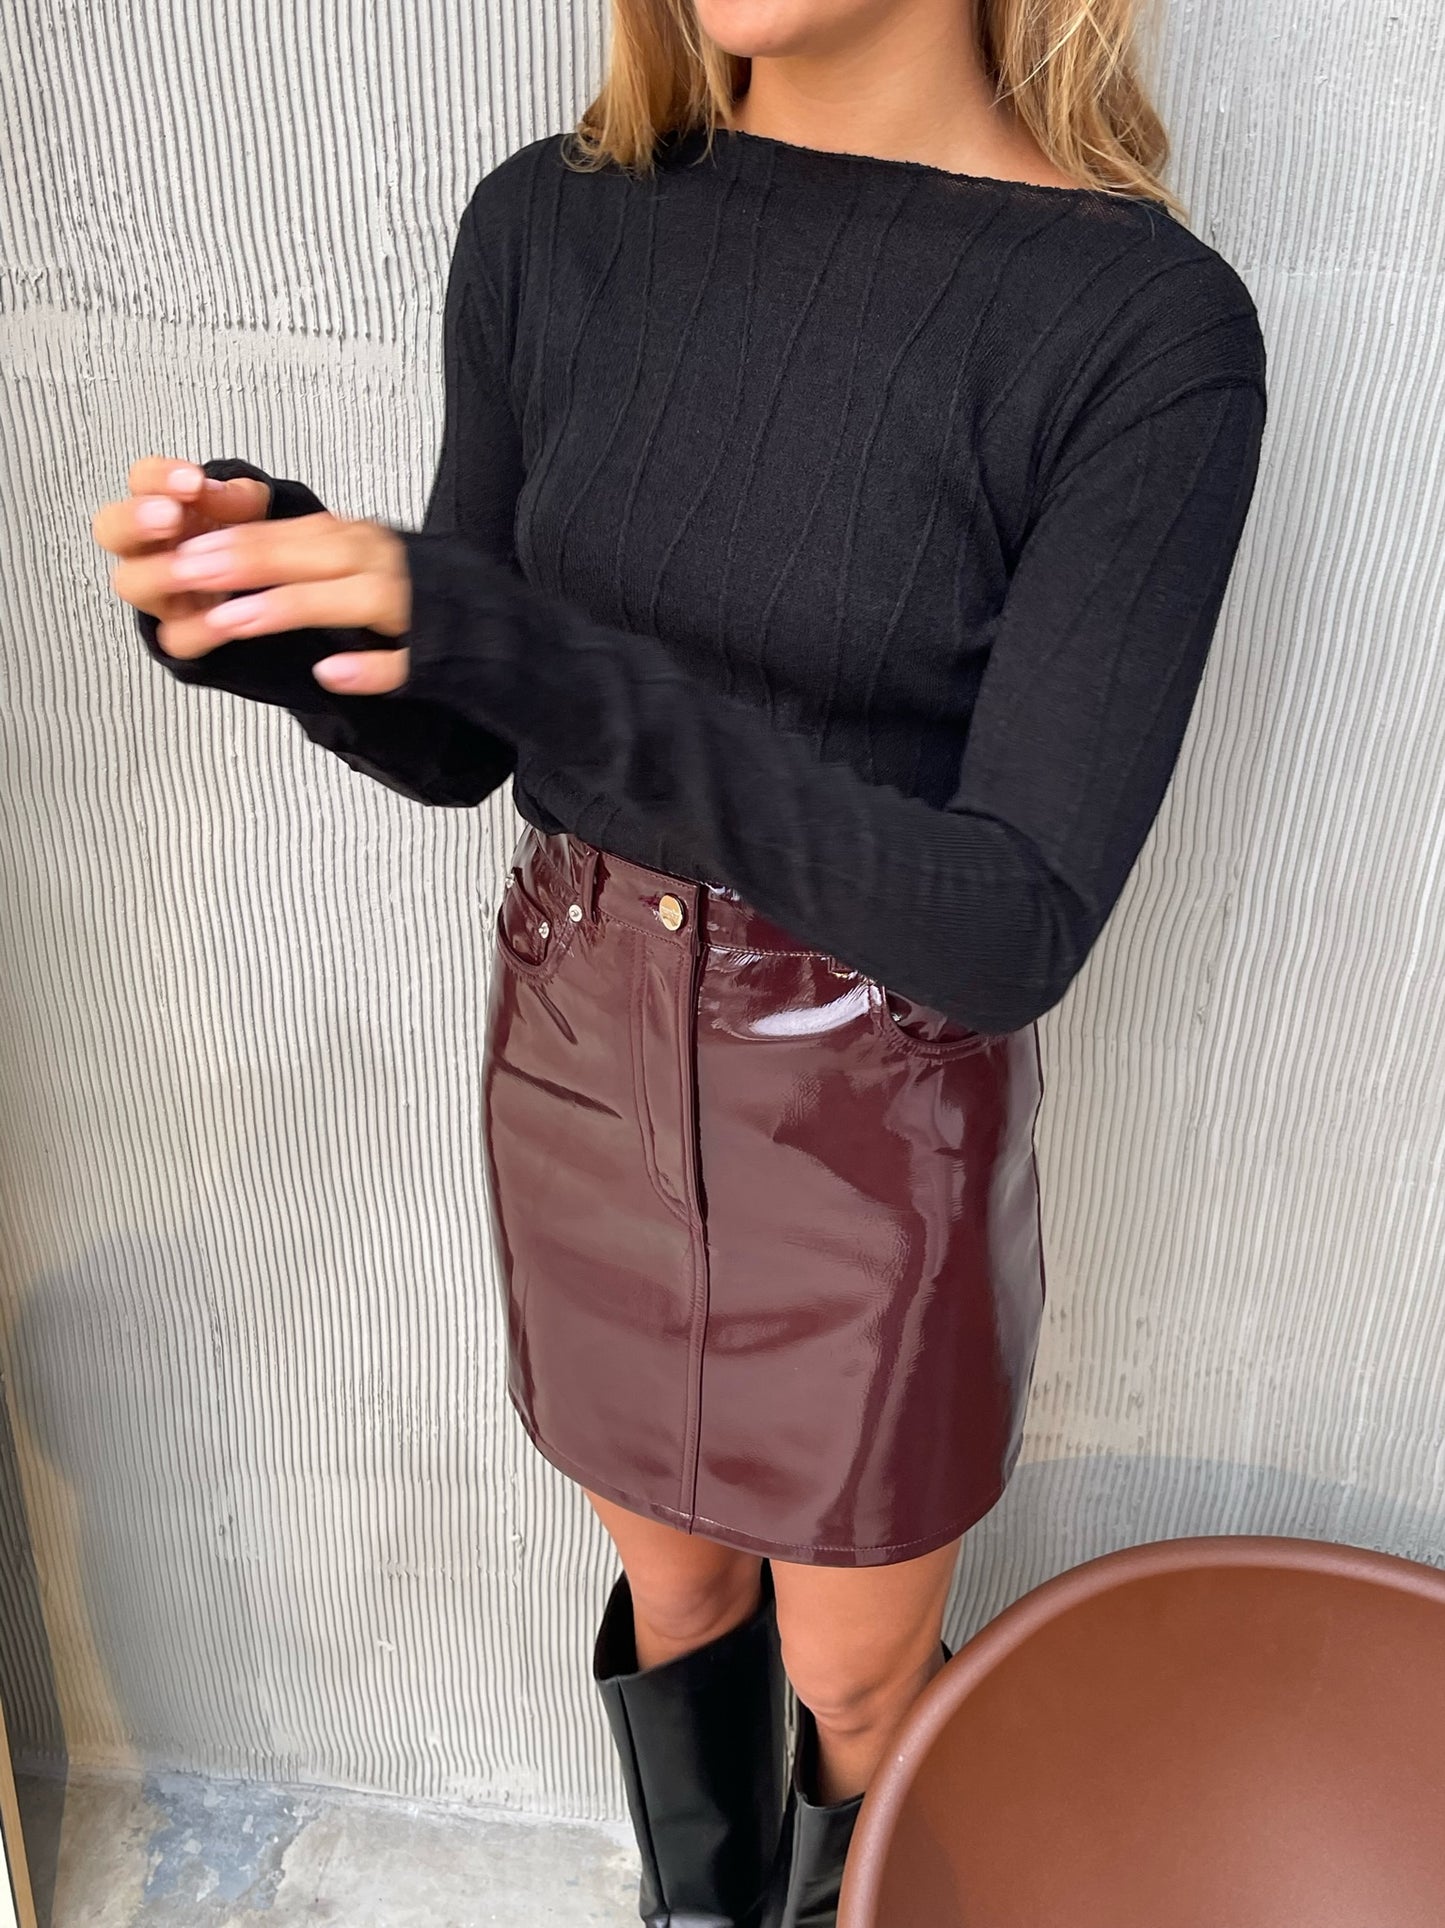 Patent Faux Leather Skirt Burgundy